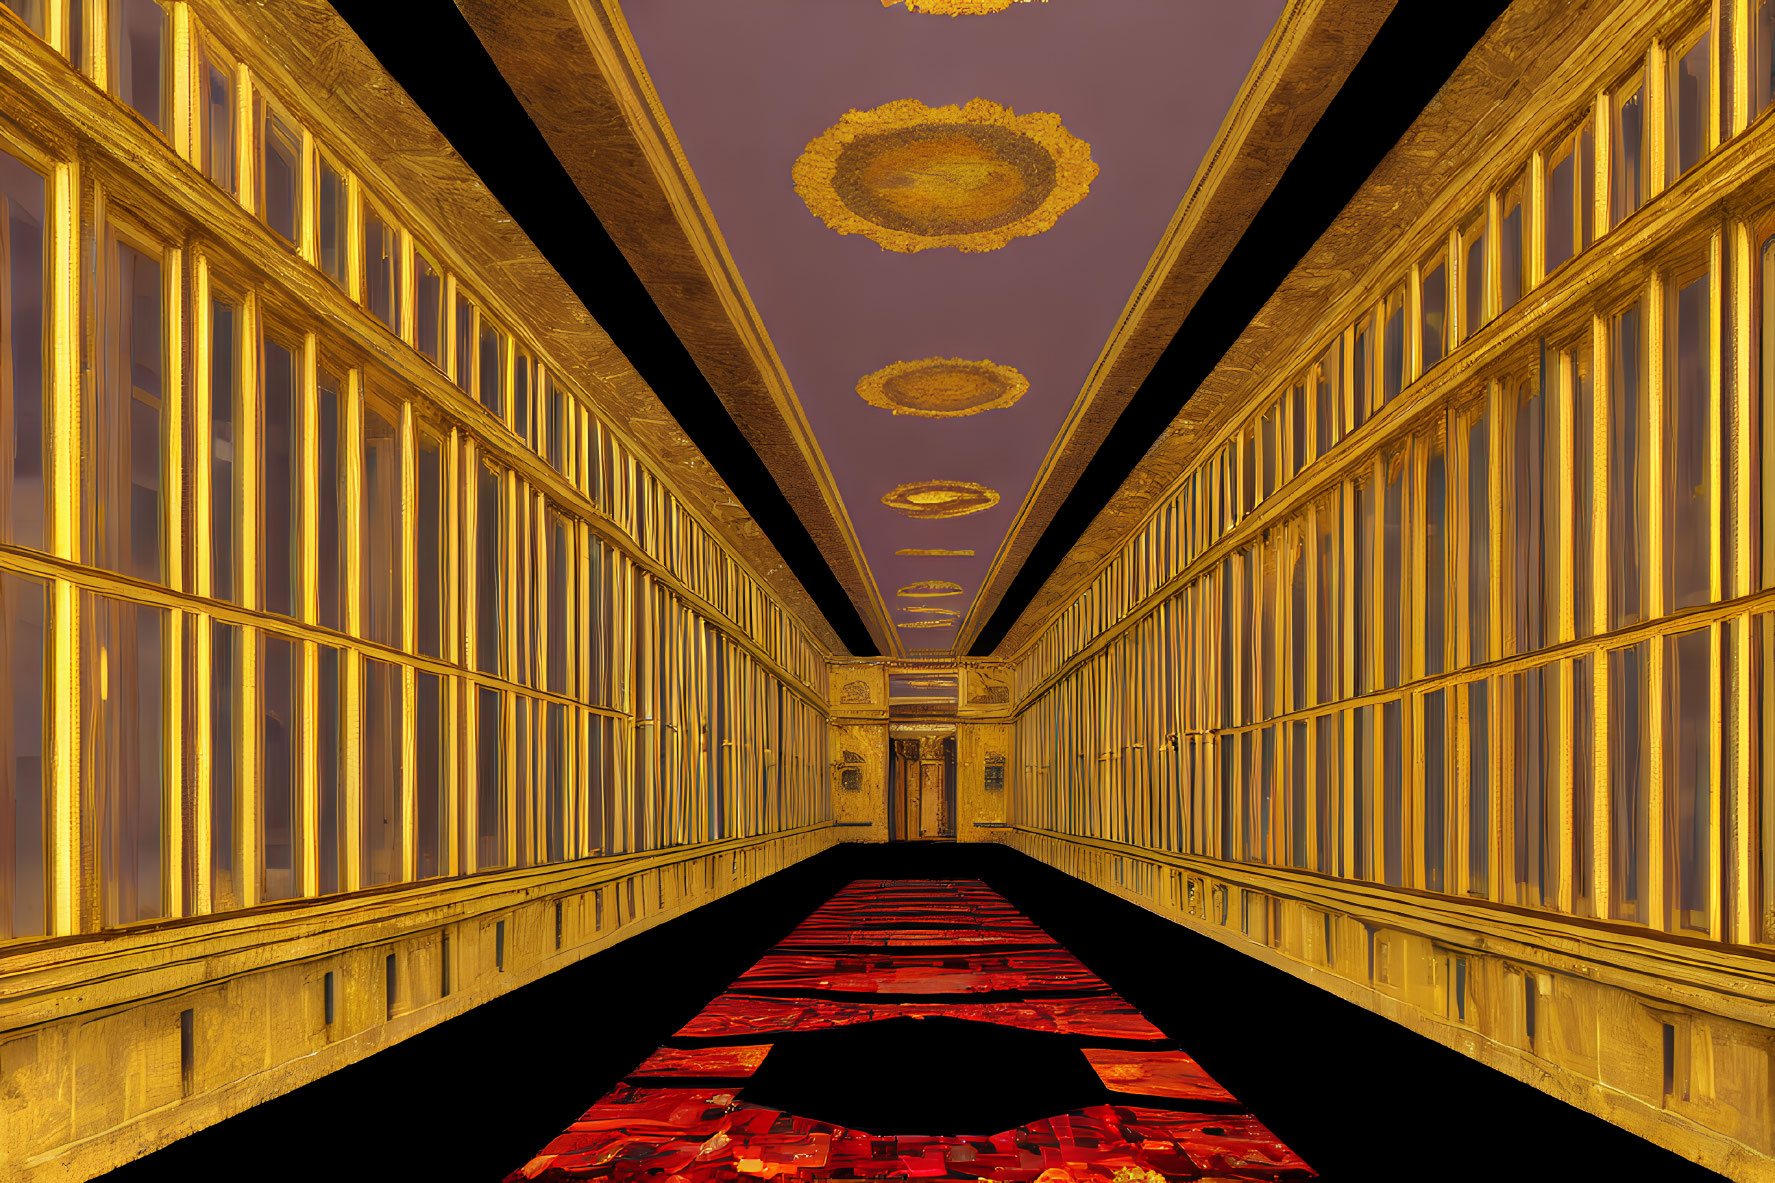 Luxurious Golden Hallway with Ornate Ceiling and Red Carpet